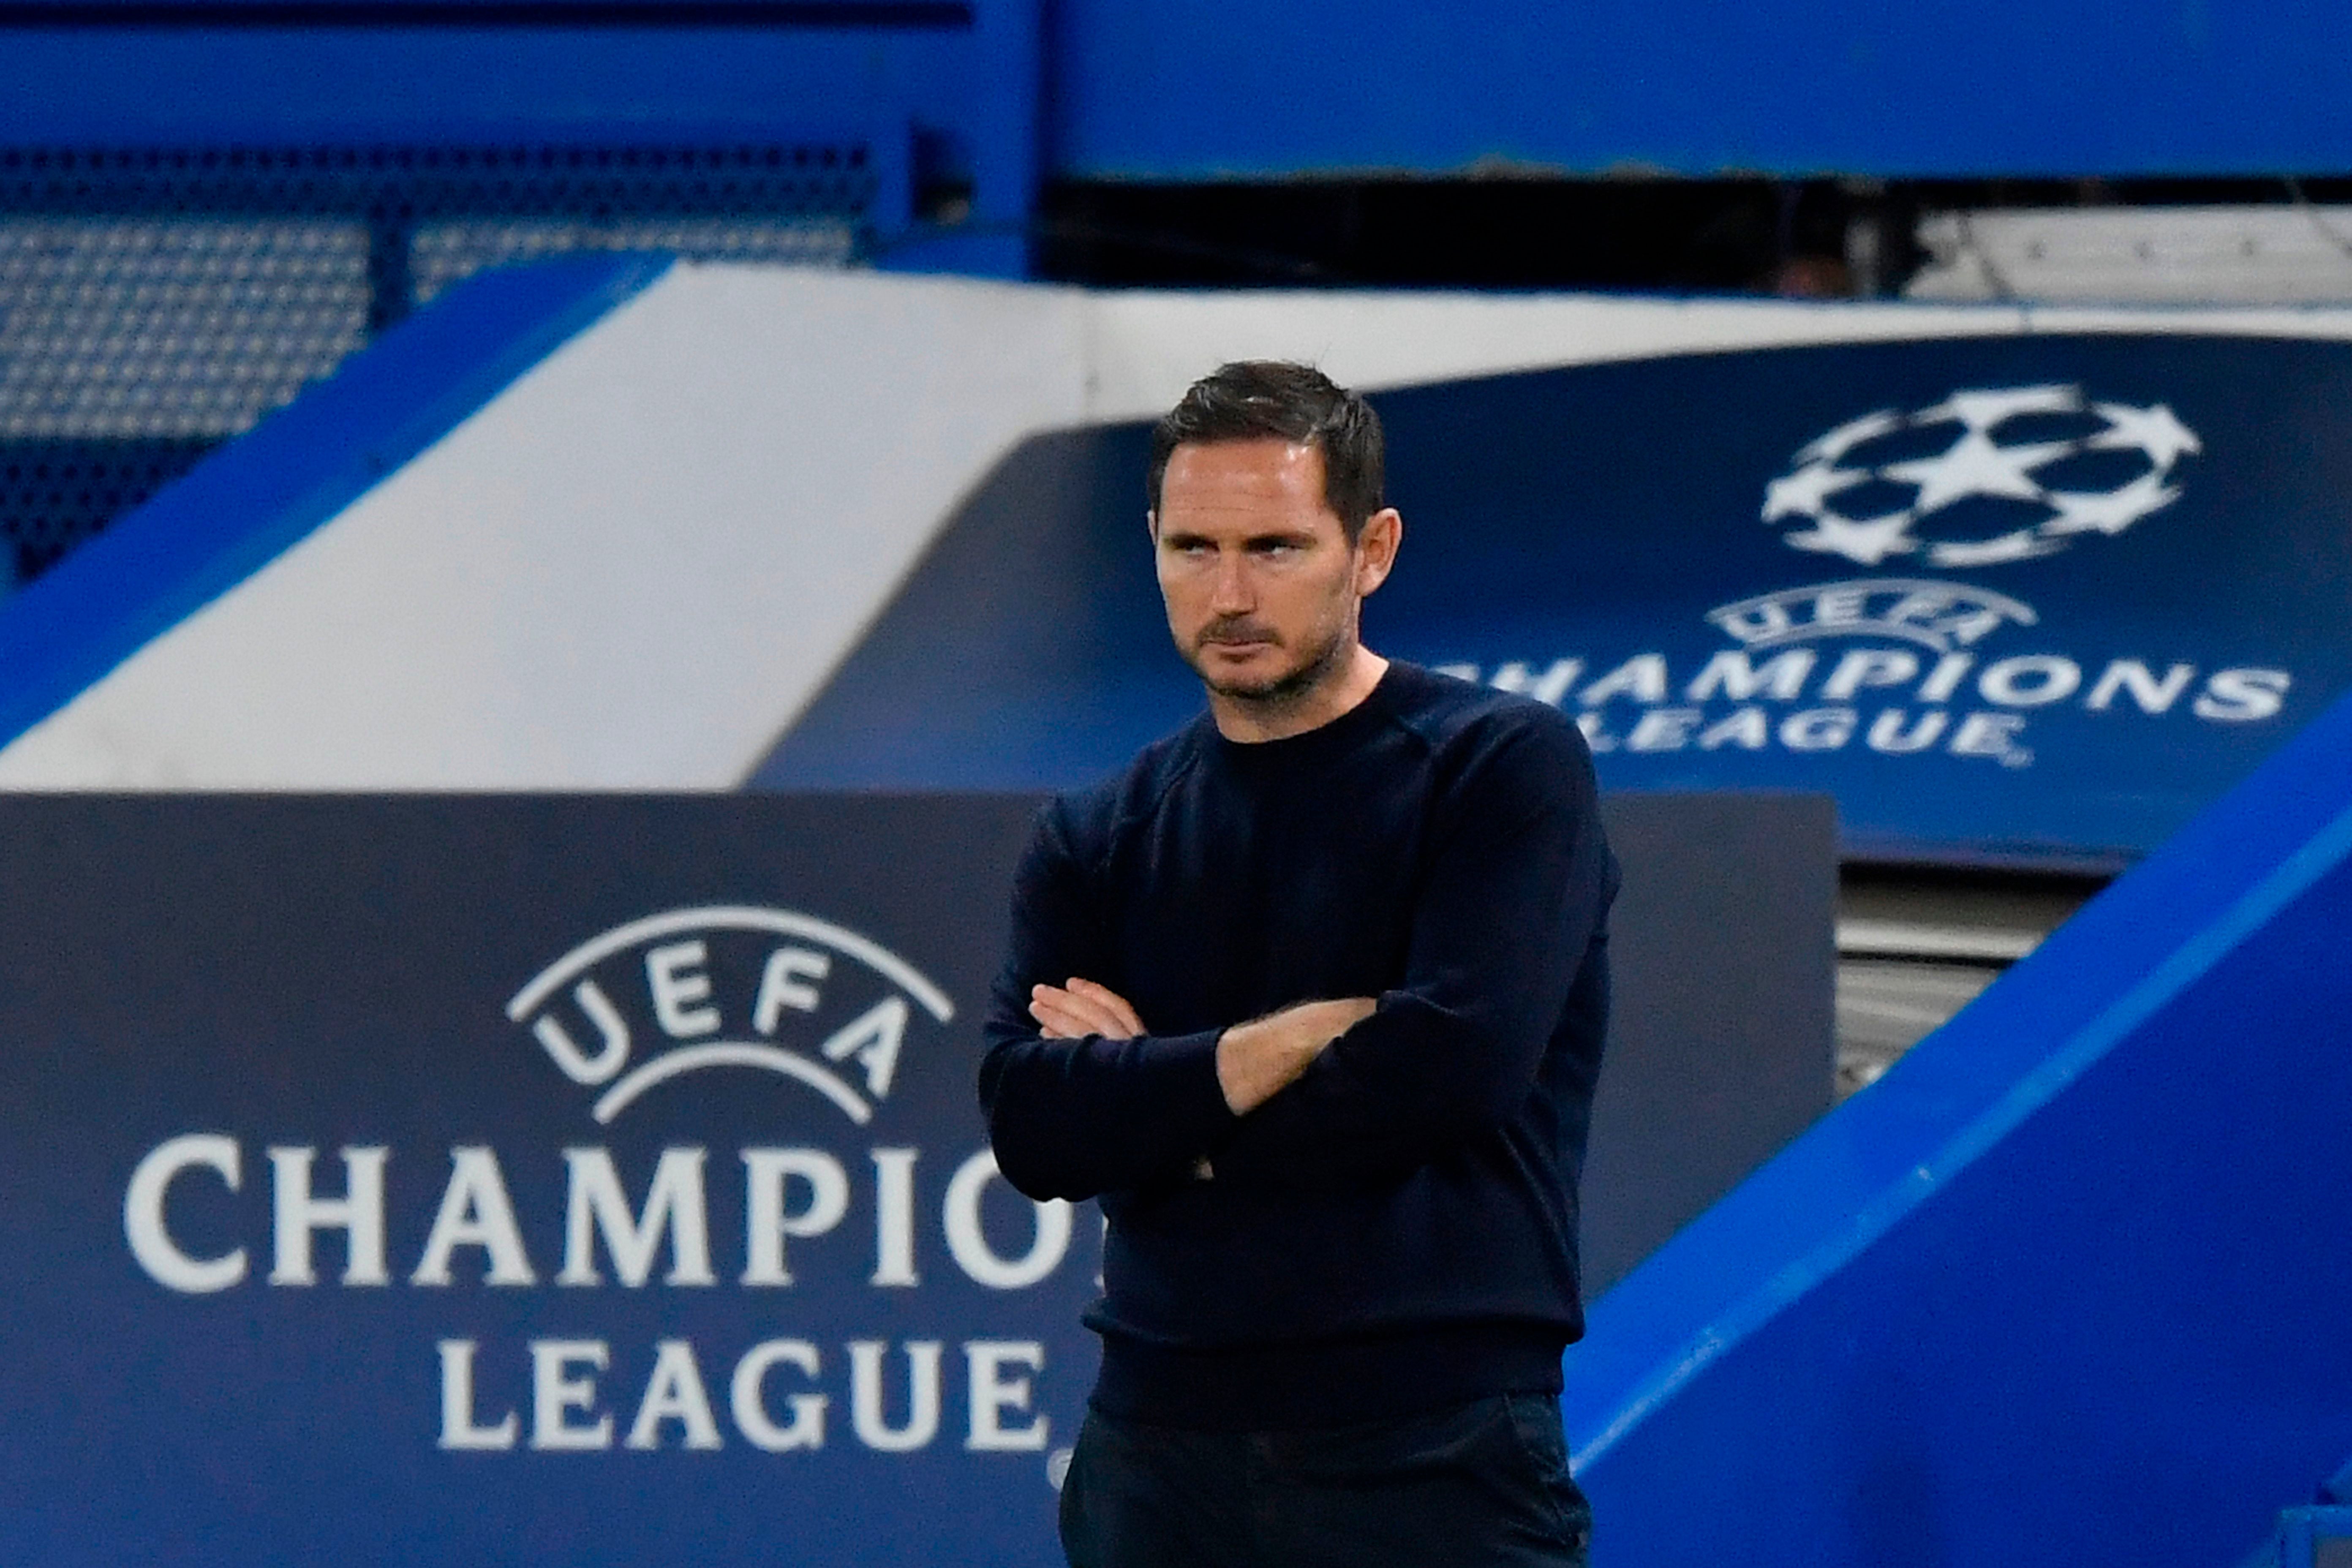 Frank Lampard watches Chelsea’s 0-0 Champions League draw with Sevilla on Tuesday night